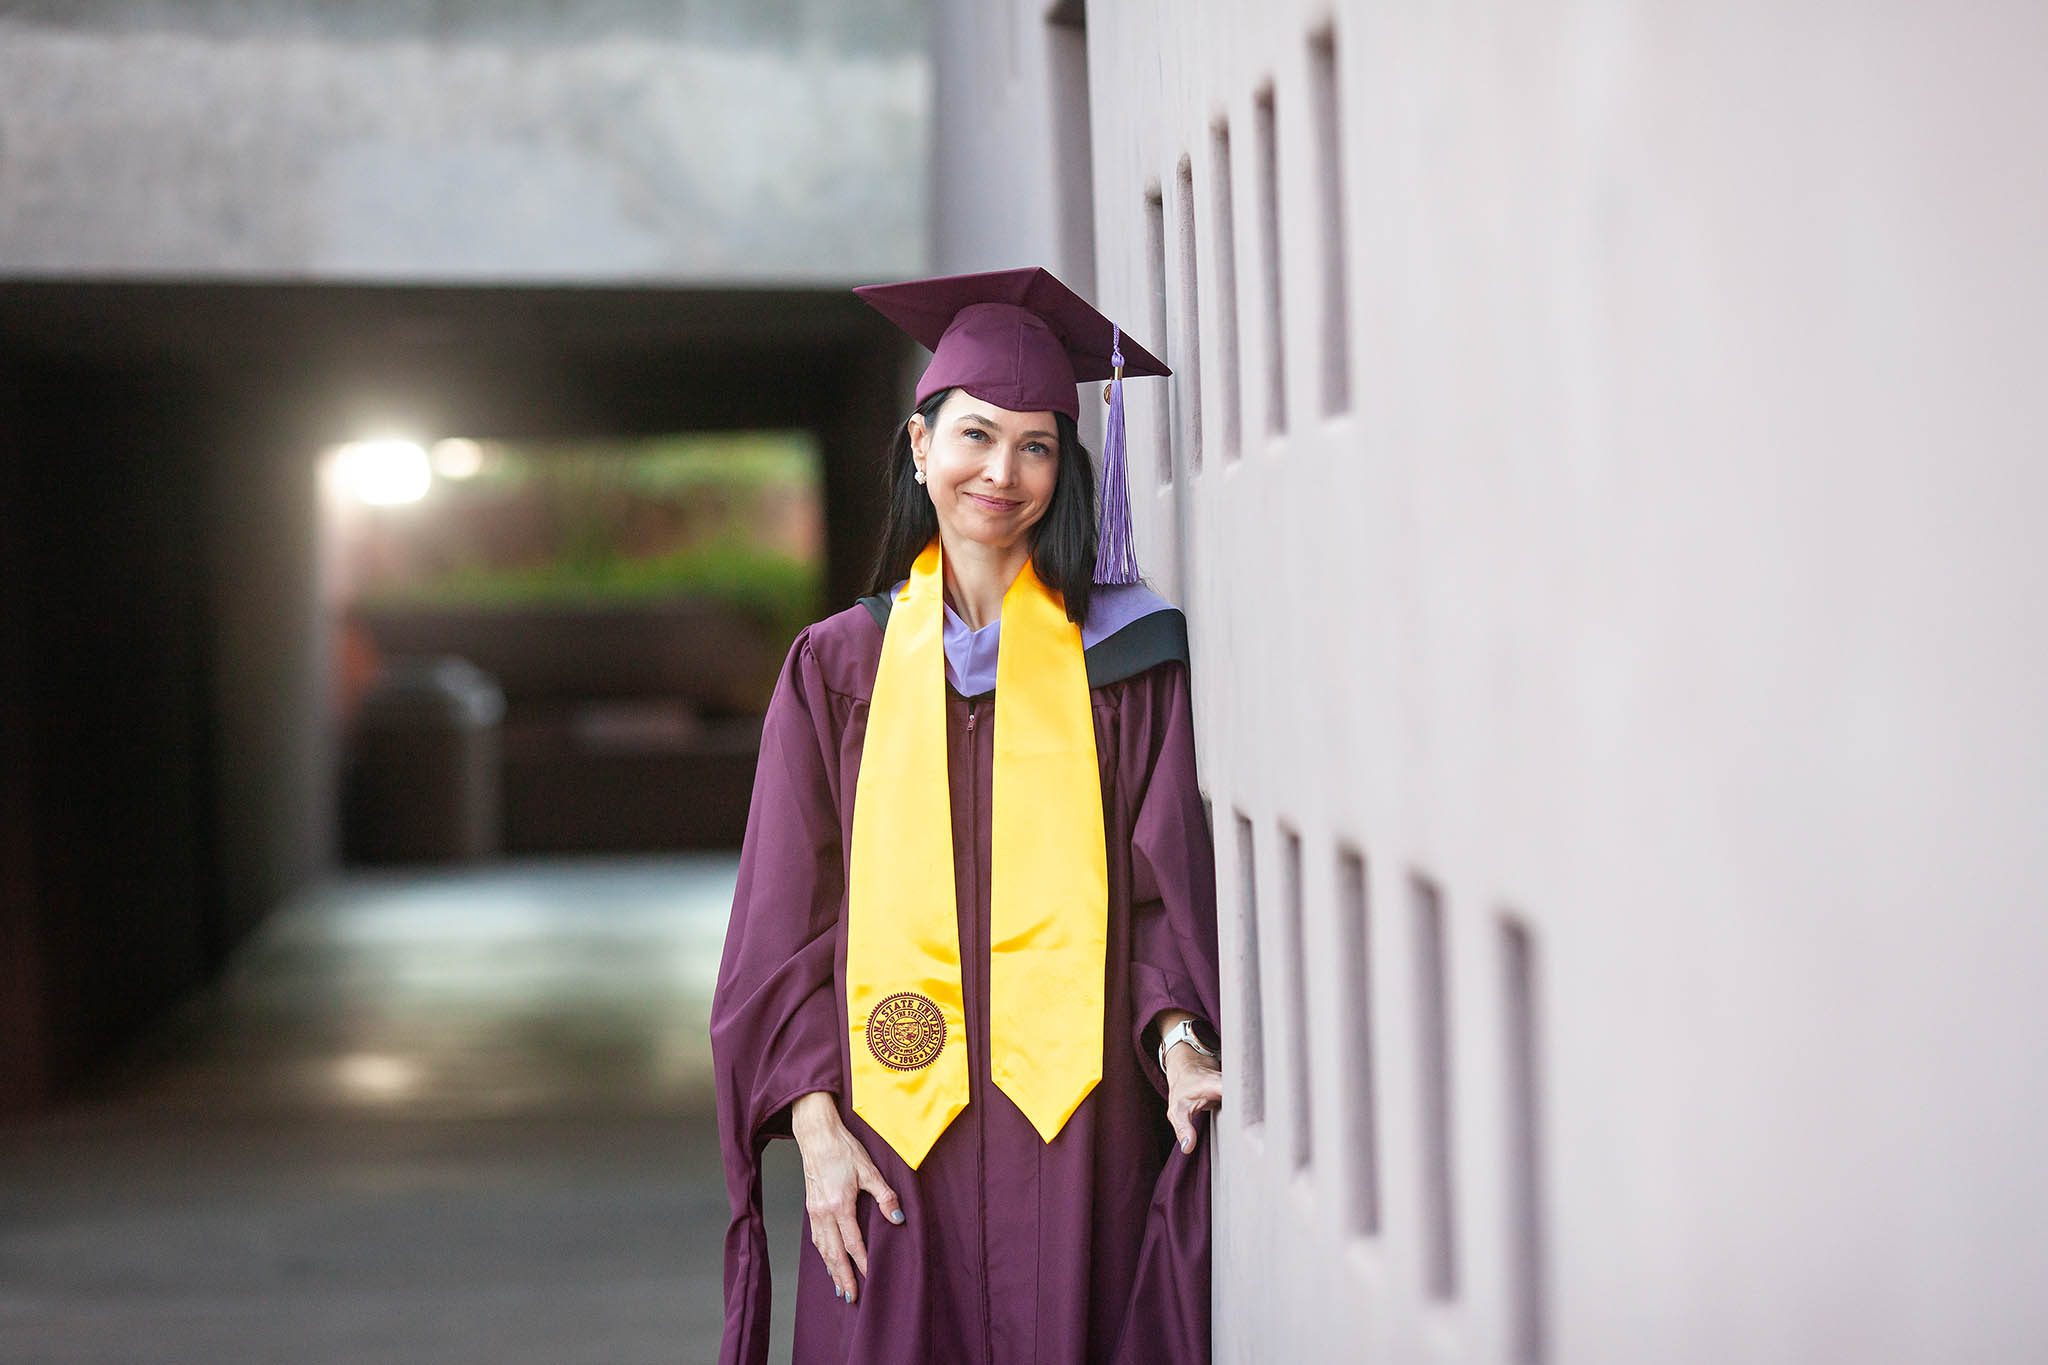 Graduation Photography at Arizona State University Cap and Gown shots